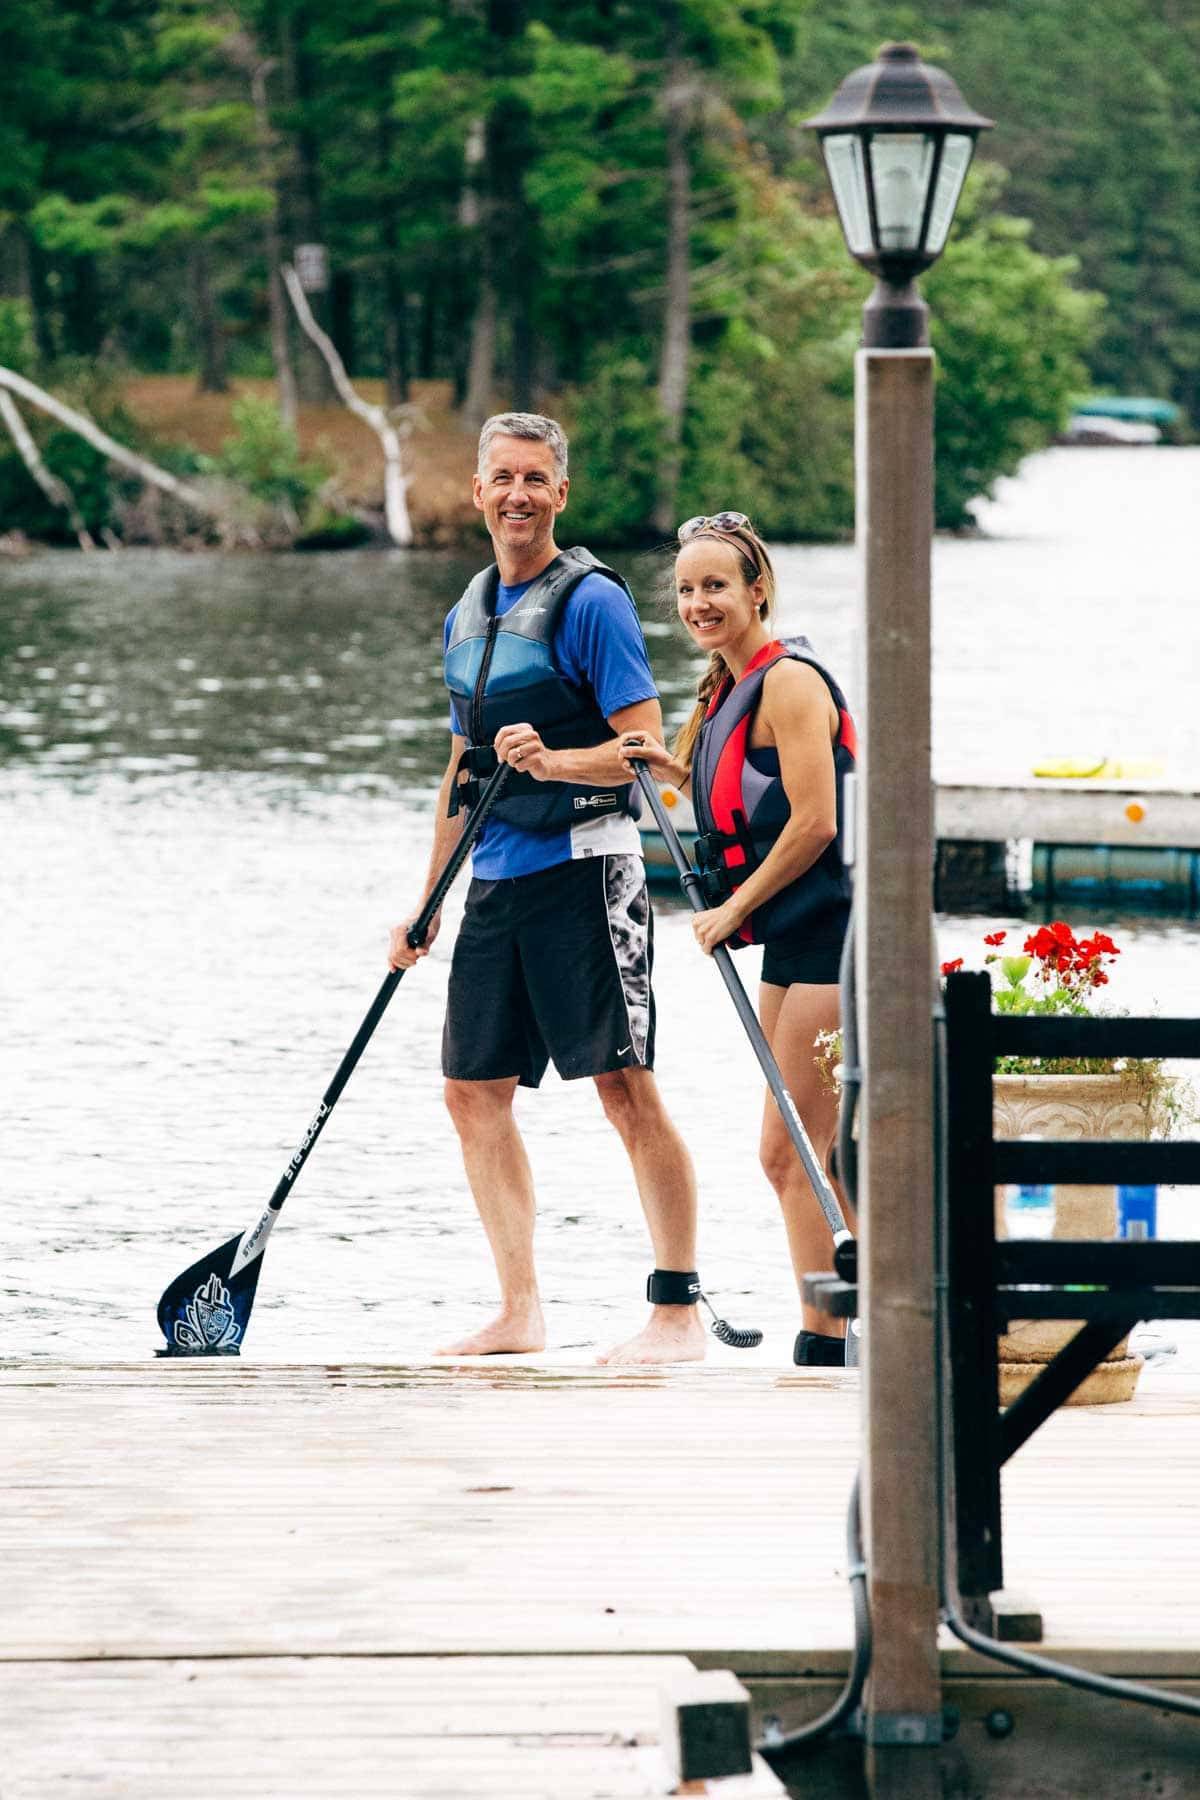 Man and woman paddle boarding.